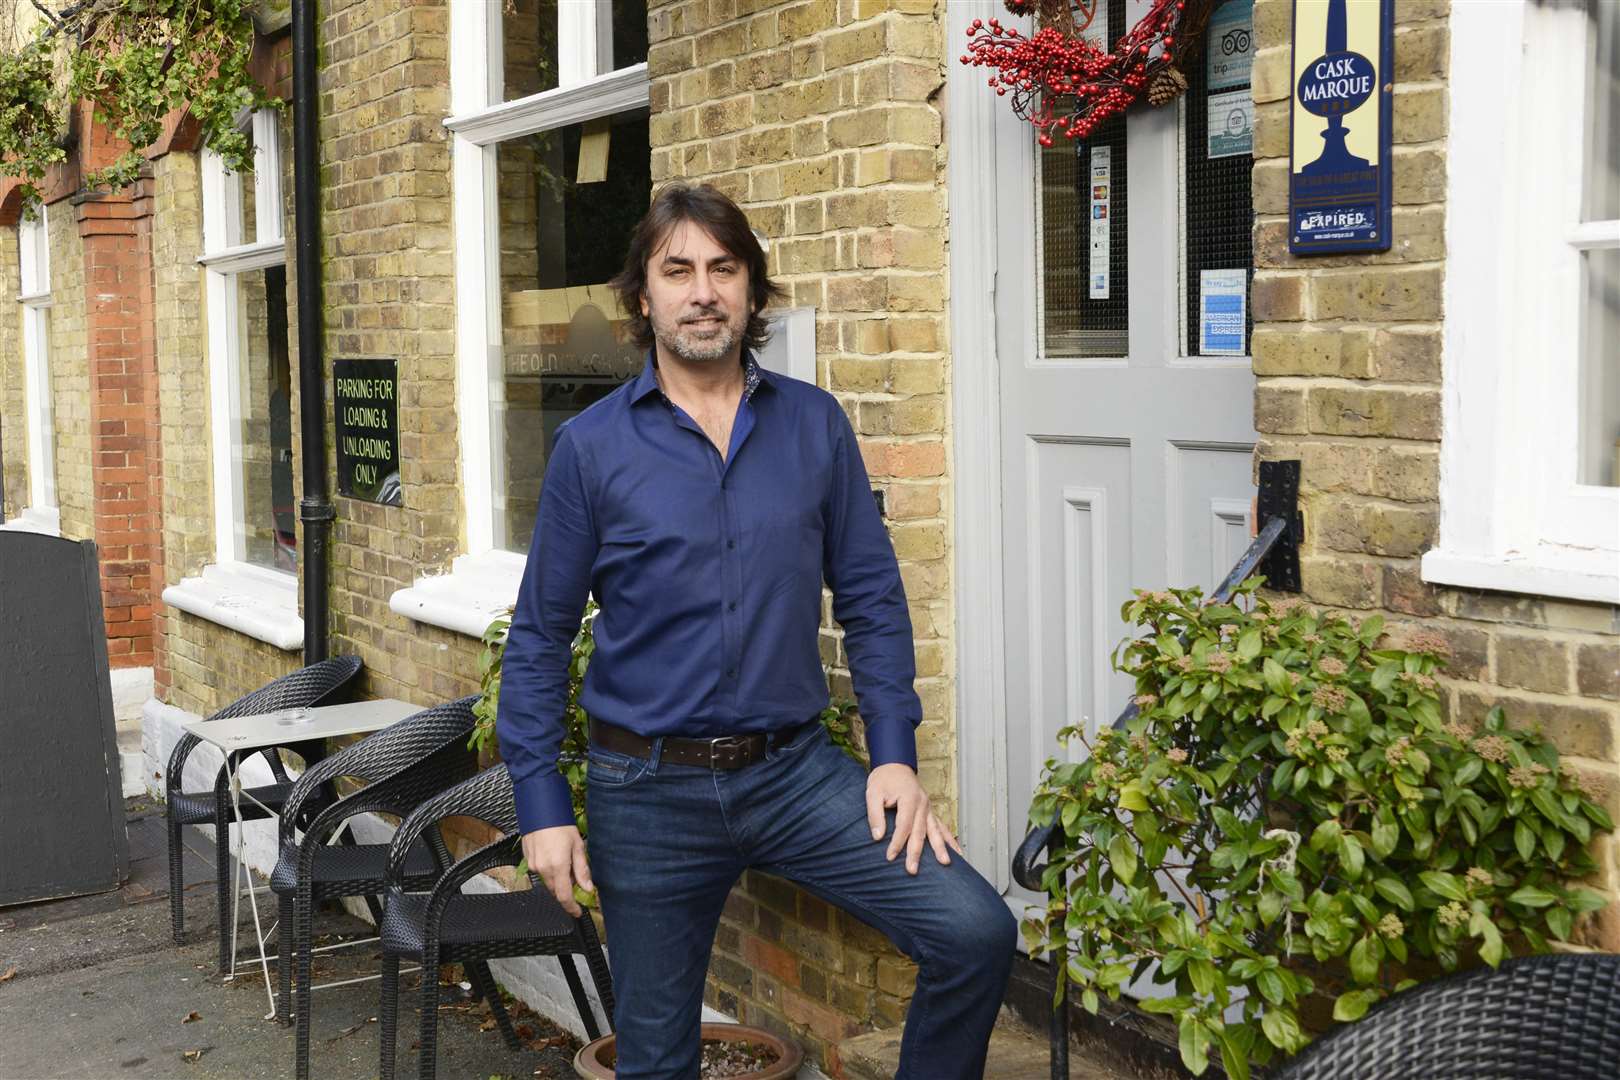 Eddie Sargeant took over the reins of the pub just before Christmas 2019